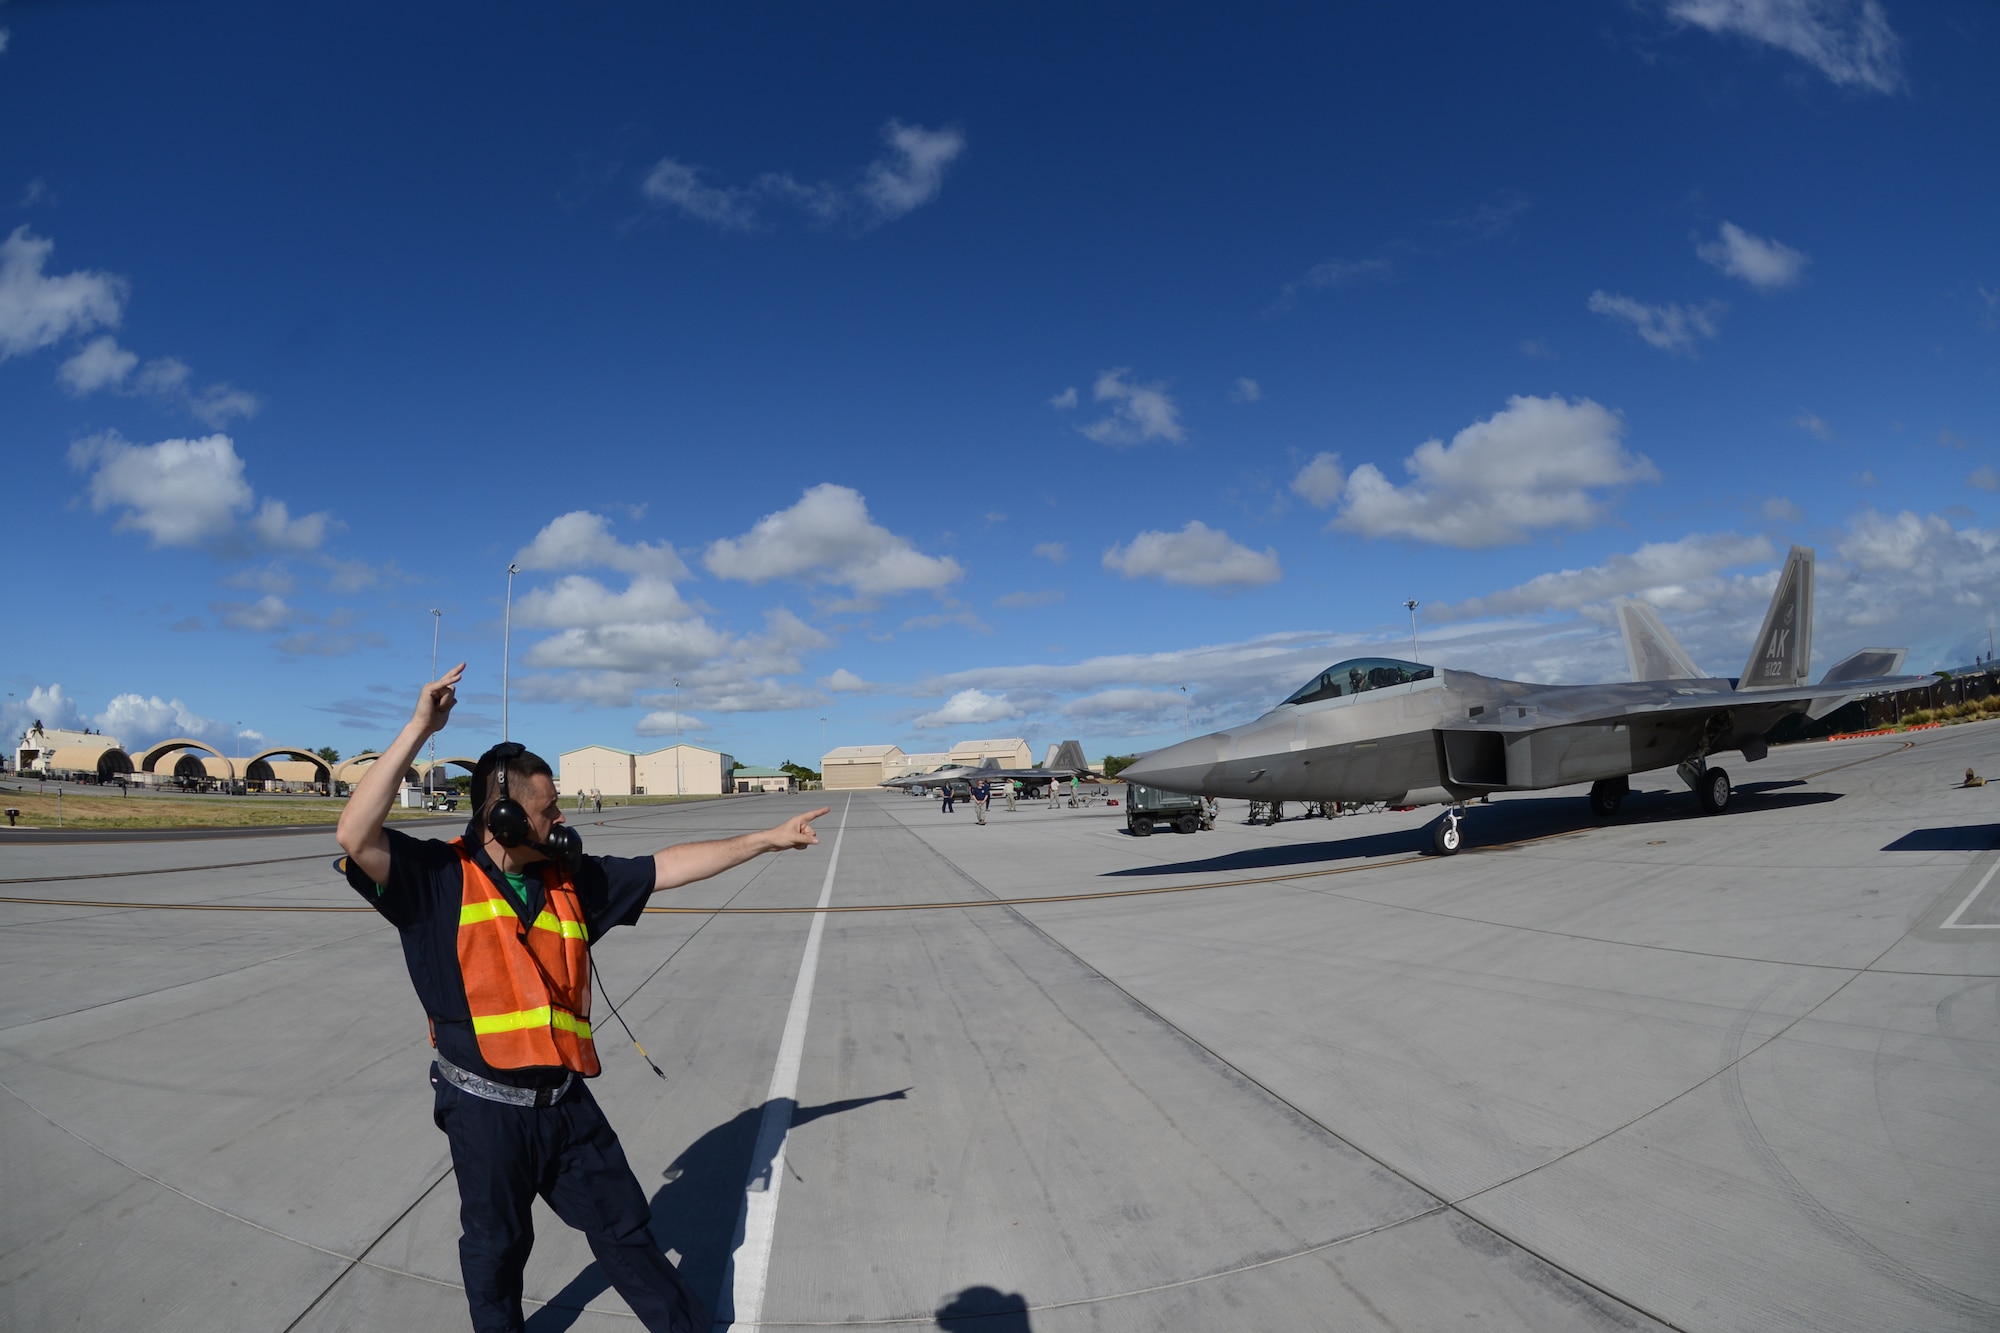 Staff Sgt. Michael Campbell, 477th Maintenance Squadron F-22 crew chief, signals to 302nd Fighter Squadron F-22 pilot Maj. Ryan Pelkola that he is clear to taxi during the 477th Fighter Group’s first ever group-wide off station annual tour at Joint Base Pearl Harbor Hickam, Hawaii Sept 6, 2014. (U.S. Air Force photo/Tech. Sgt. Dana Rosso)

